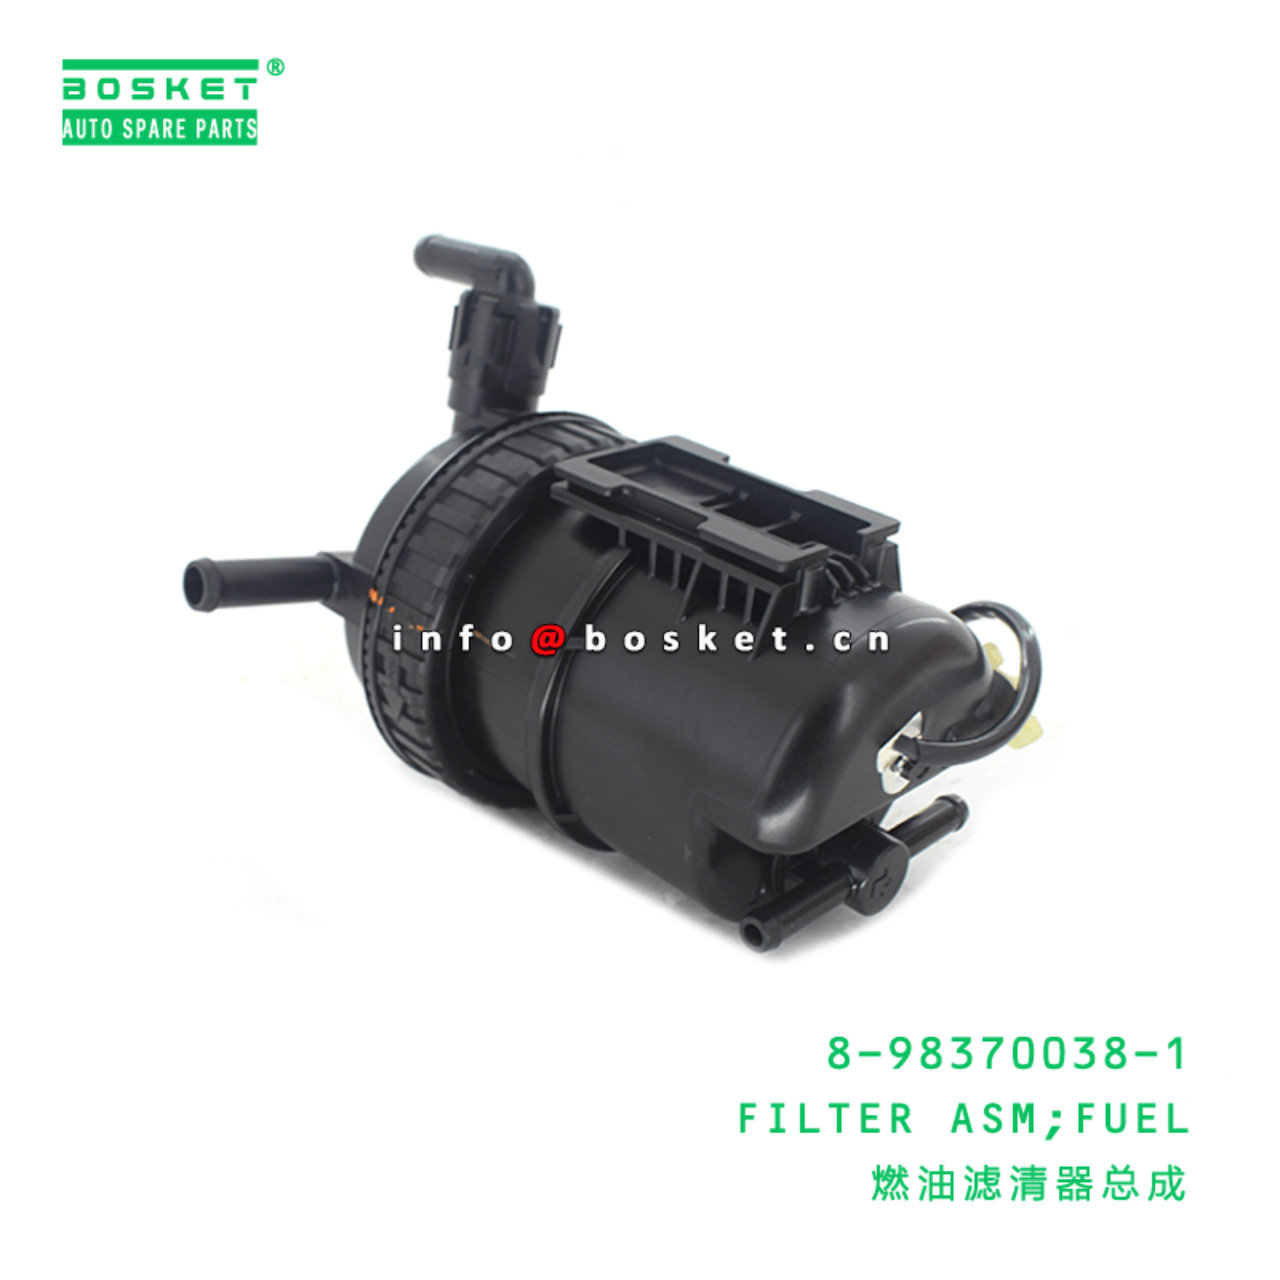 8-98370038-1 Fuel Filter Assembly 8983700381 Suitable for ISUZU NPR